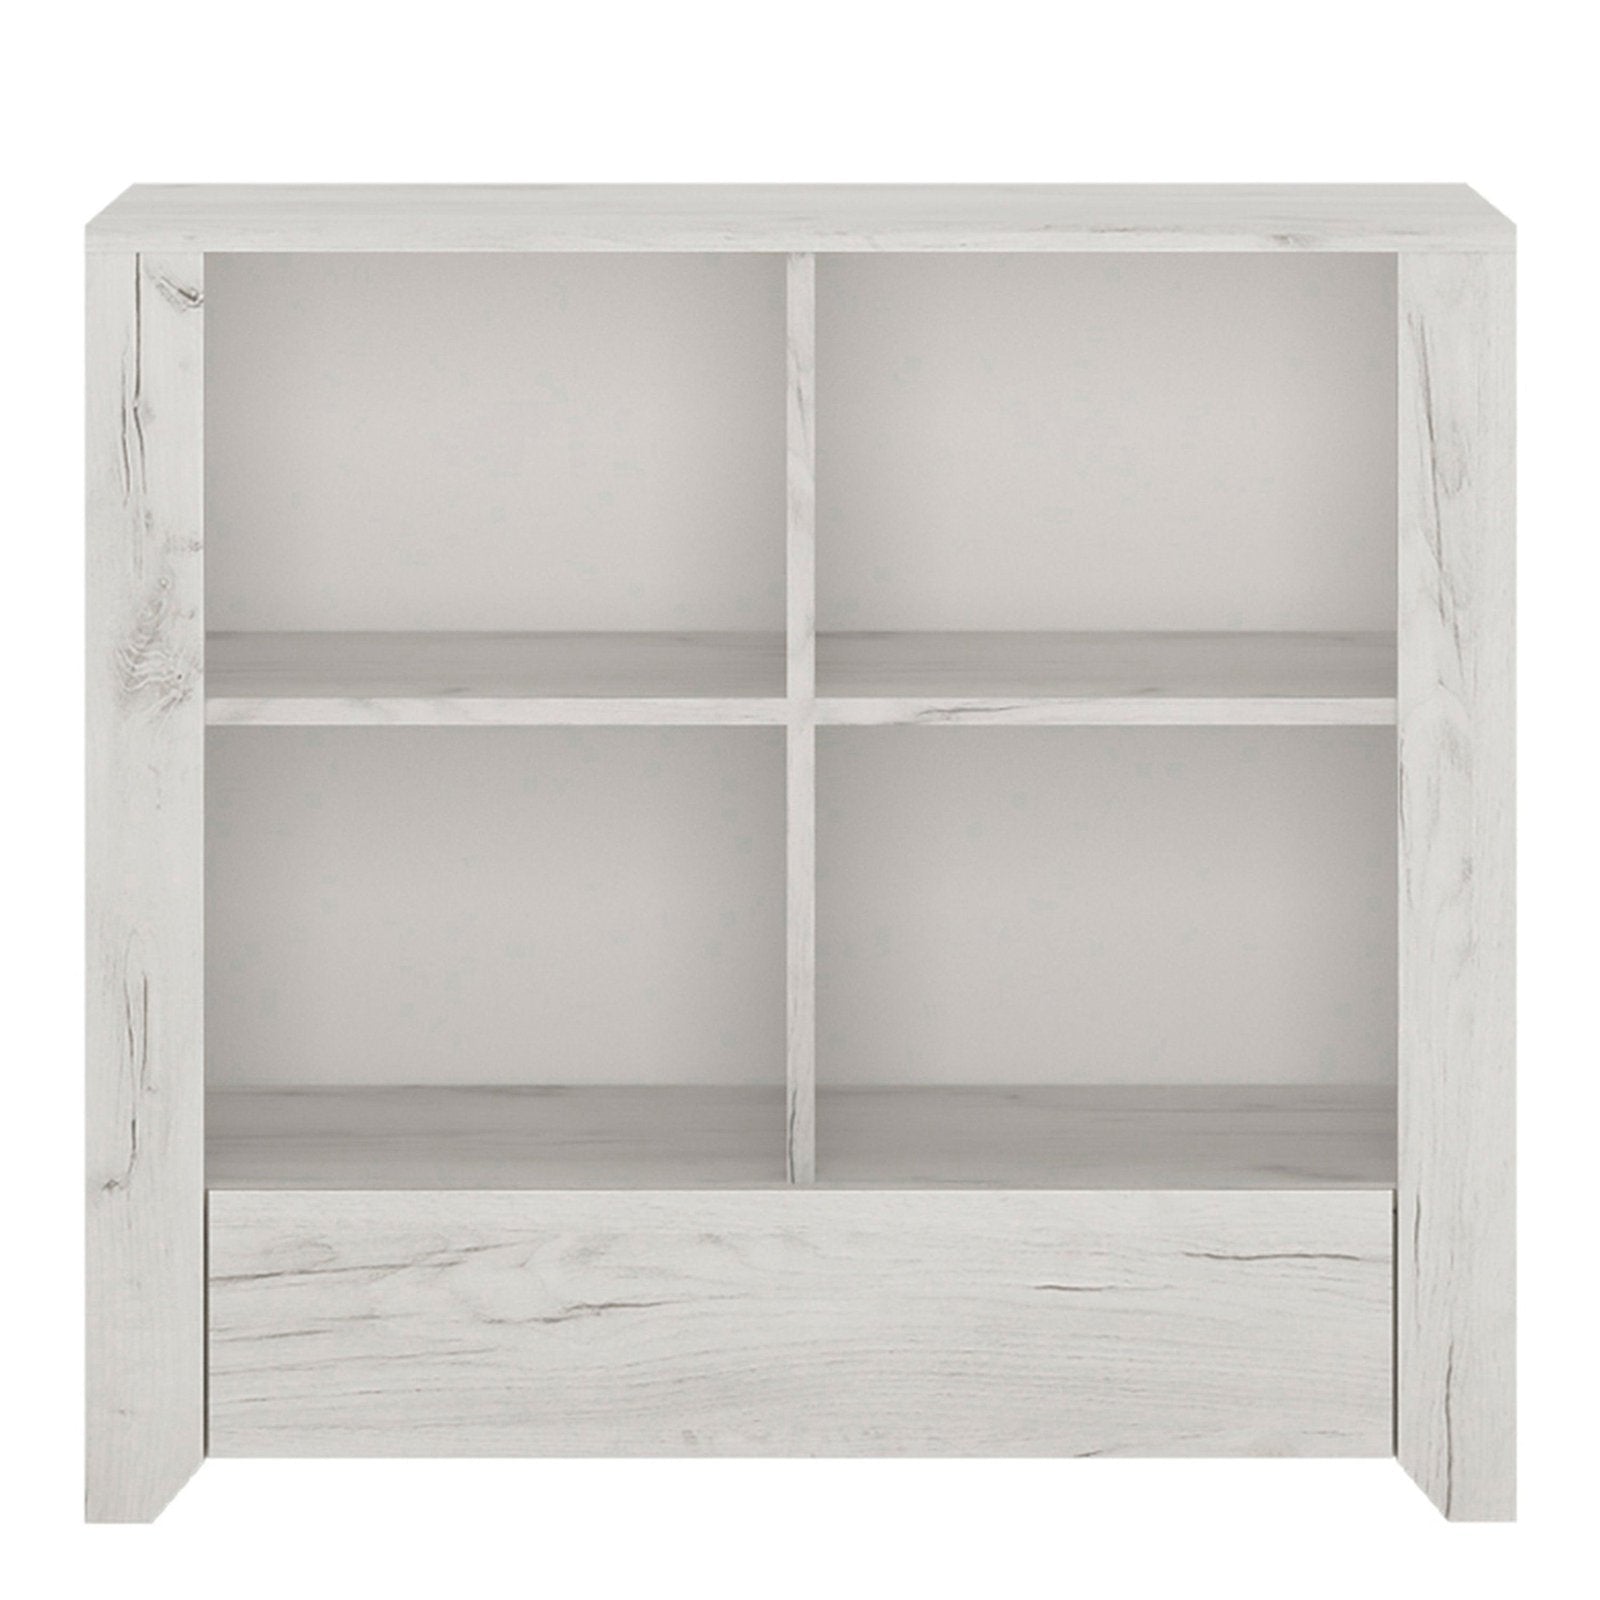 Angel 1 Drawer Low Bookcase in White Craft Oak